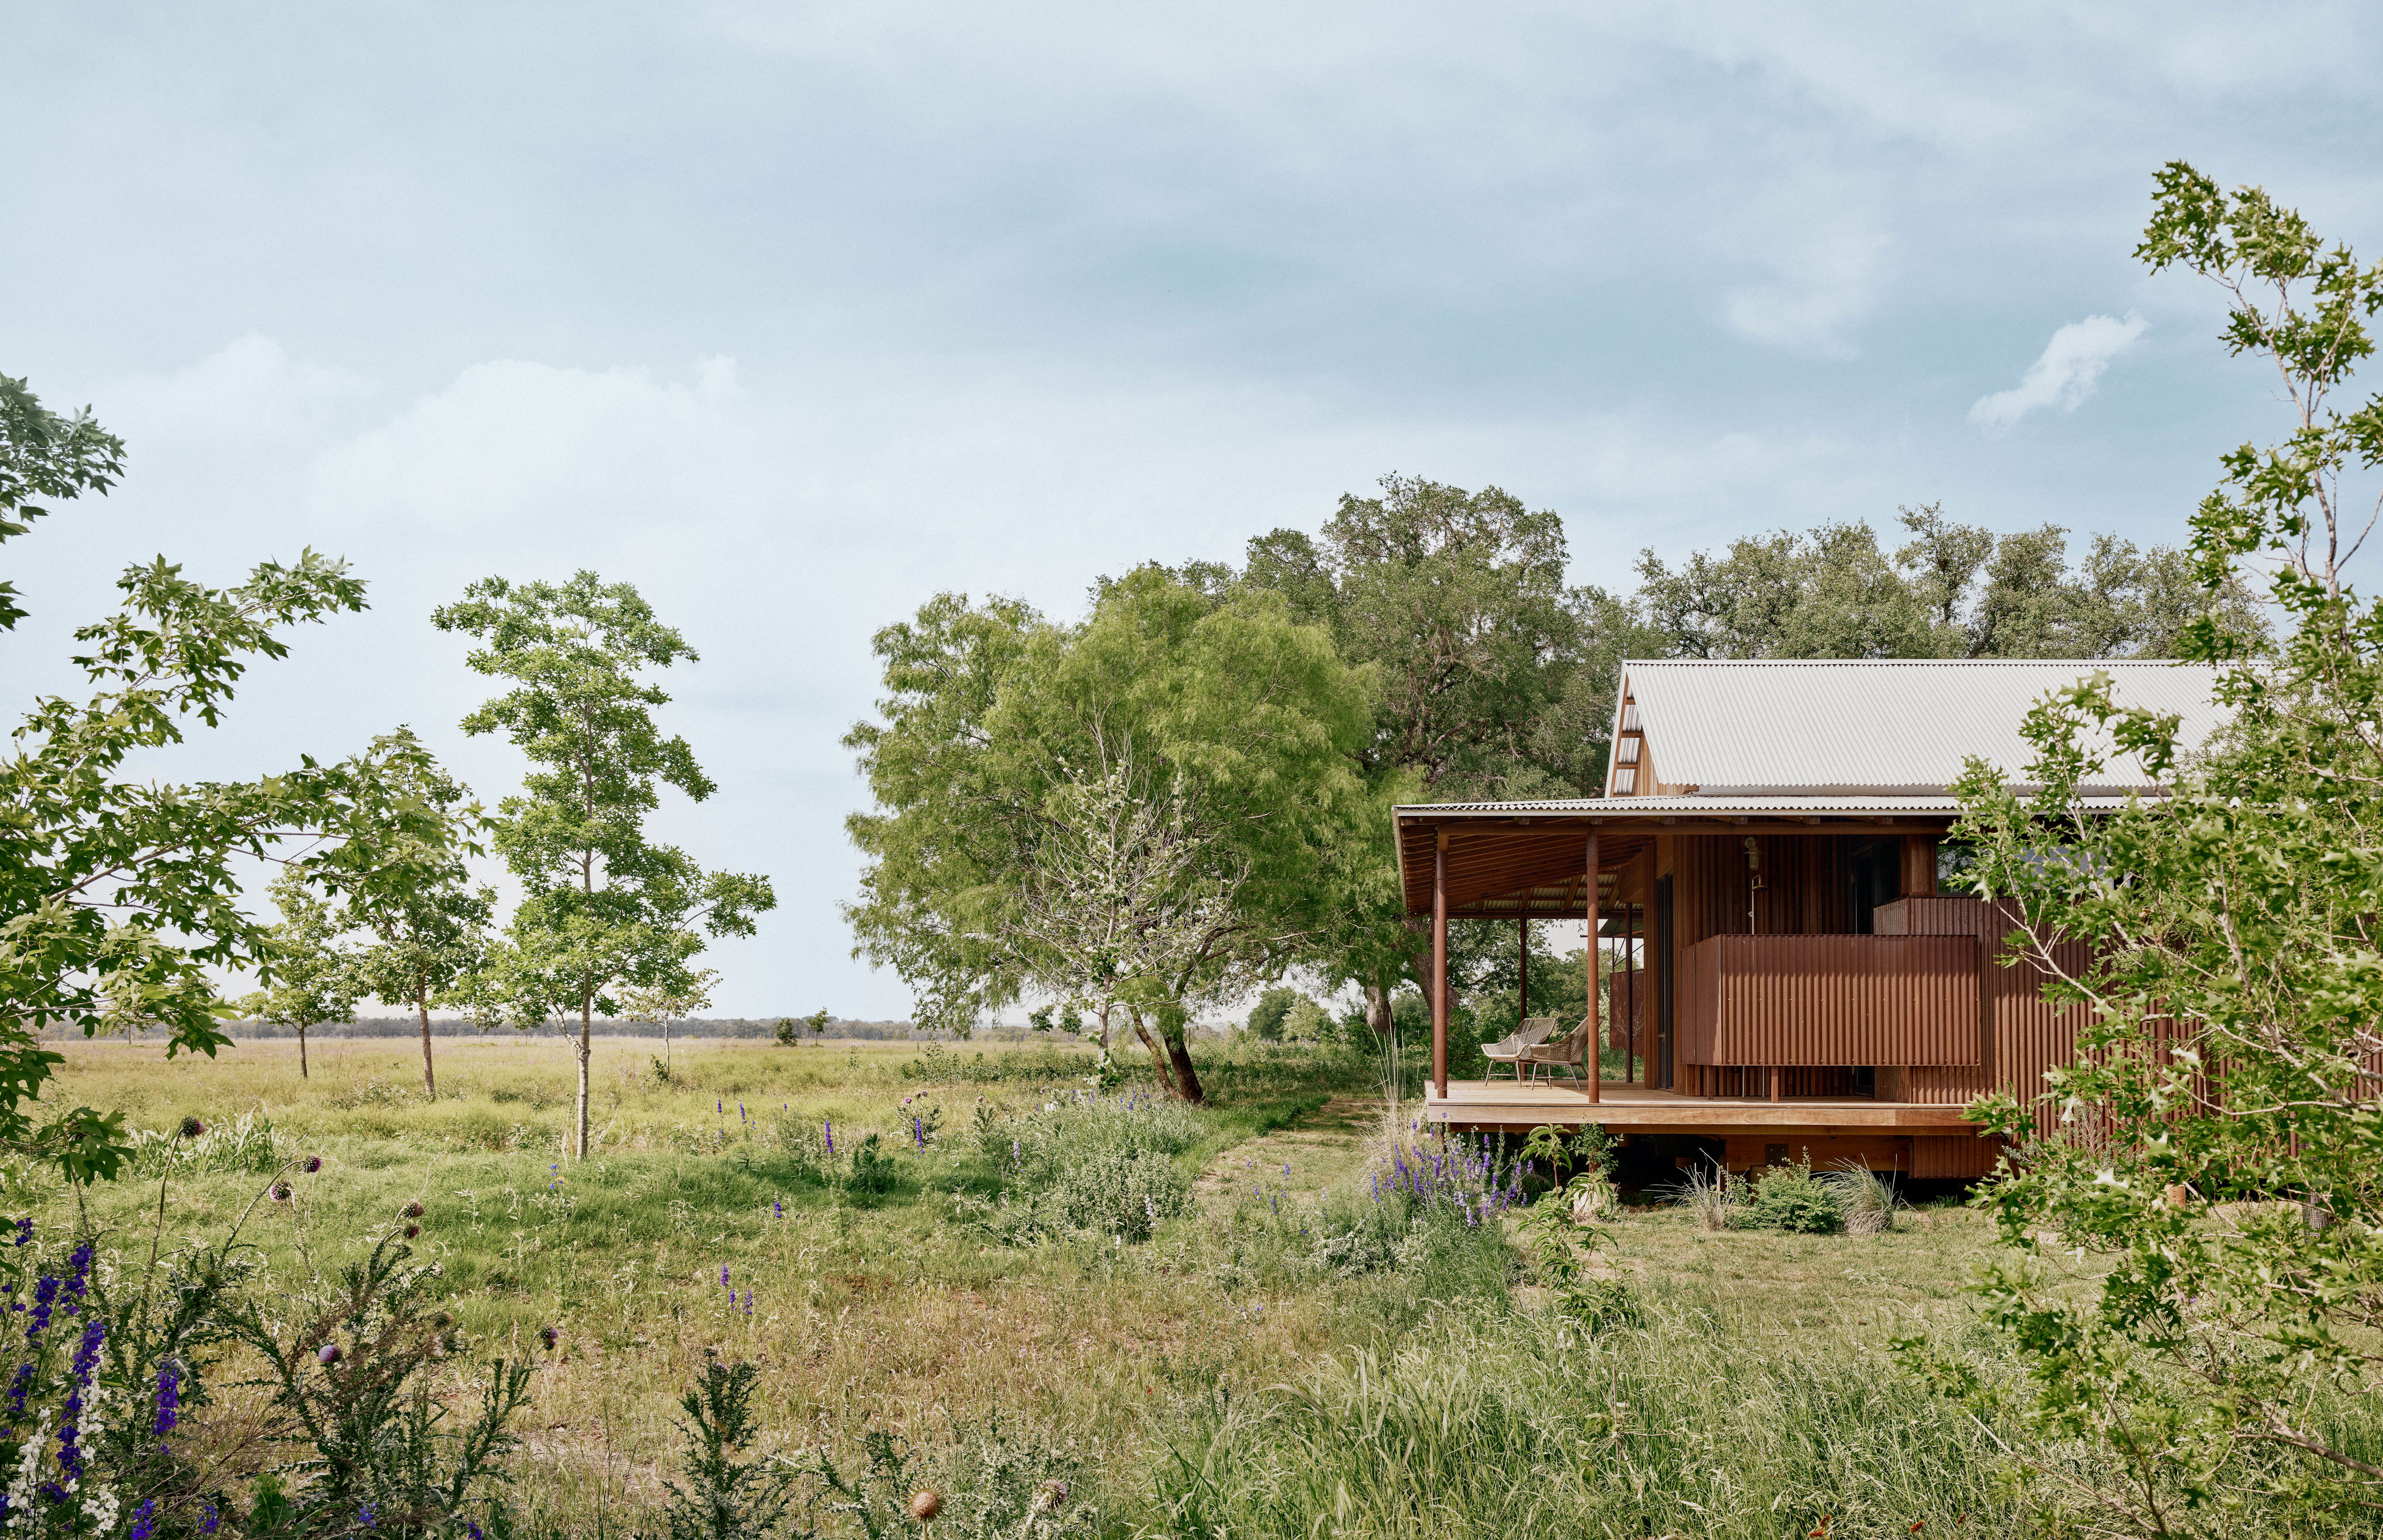 In 2020, when Taylor Collins and Katie Forrest moved permanently from their city house in Austin to their bison, pig, and poultry ranch in Fredericksburg, Texas, they called Baldridge Architects to redesign it as a nearly 4,400-square-foot family home.<p>Sign up for our newsletter to get the latest in design, decorating, celebrity style, shopping, and more.</p><a href="https://www.architecturaldigest.com/newsletter/subscribe?sourceCode=msnsend">Sign Up Now</a>